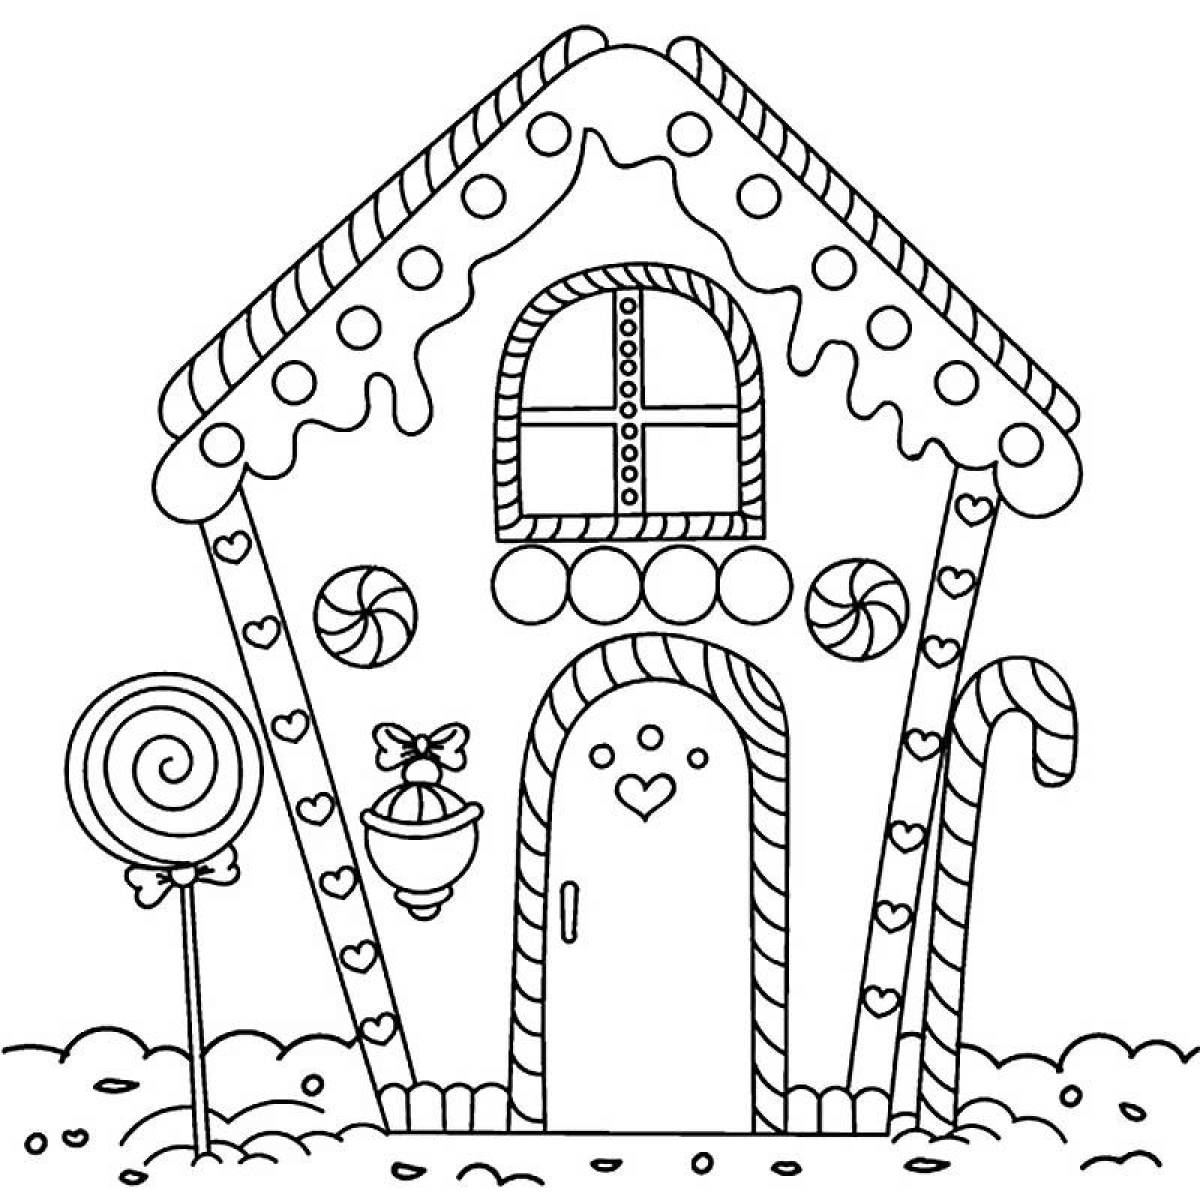 Coloring page funny gingerbread house